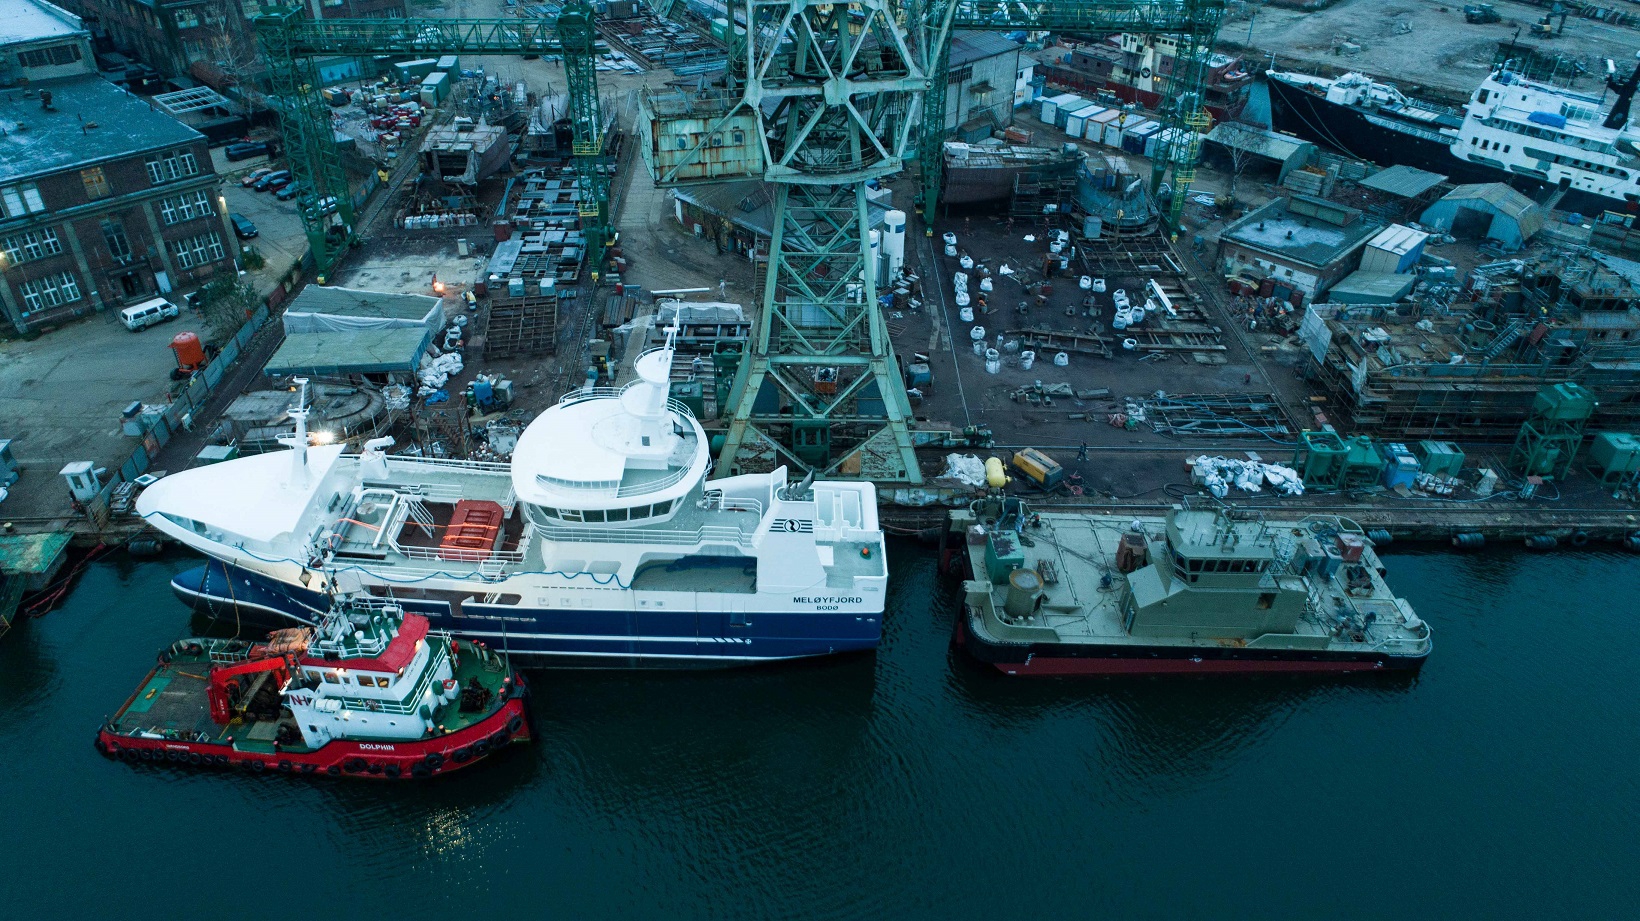 Work at the Safe Shipyard is in full swing! (photo, video) - MarinePoland.com